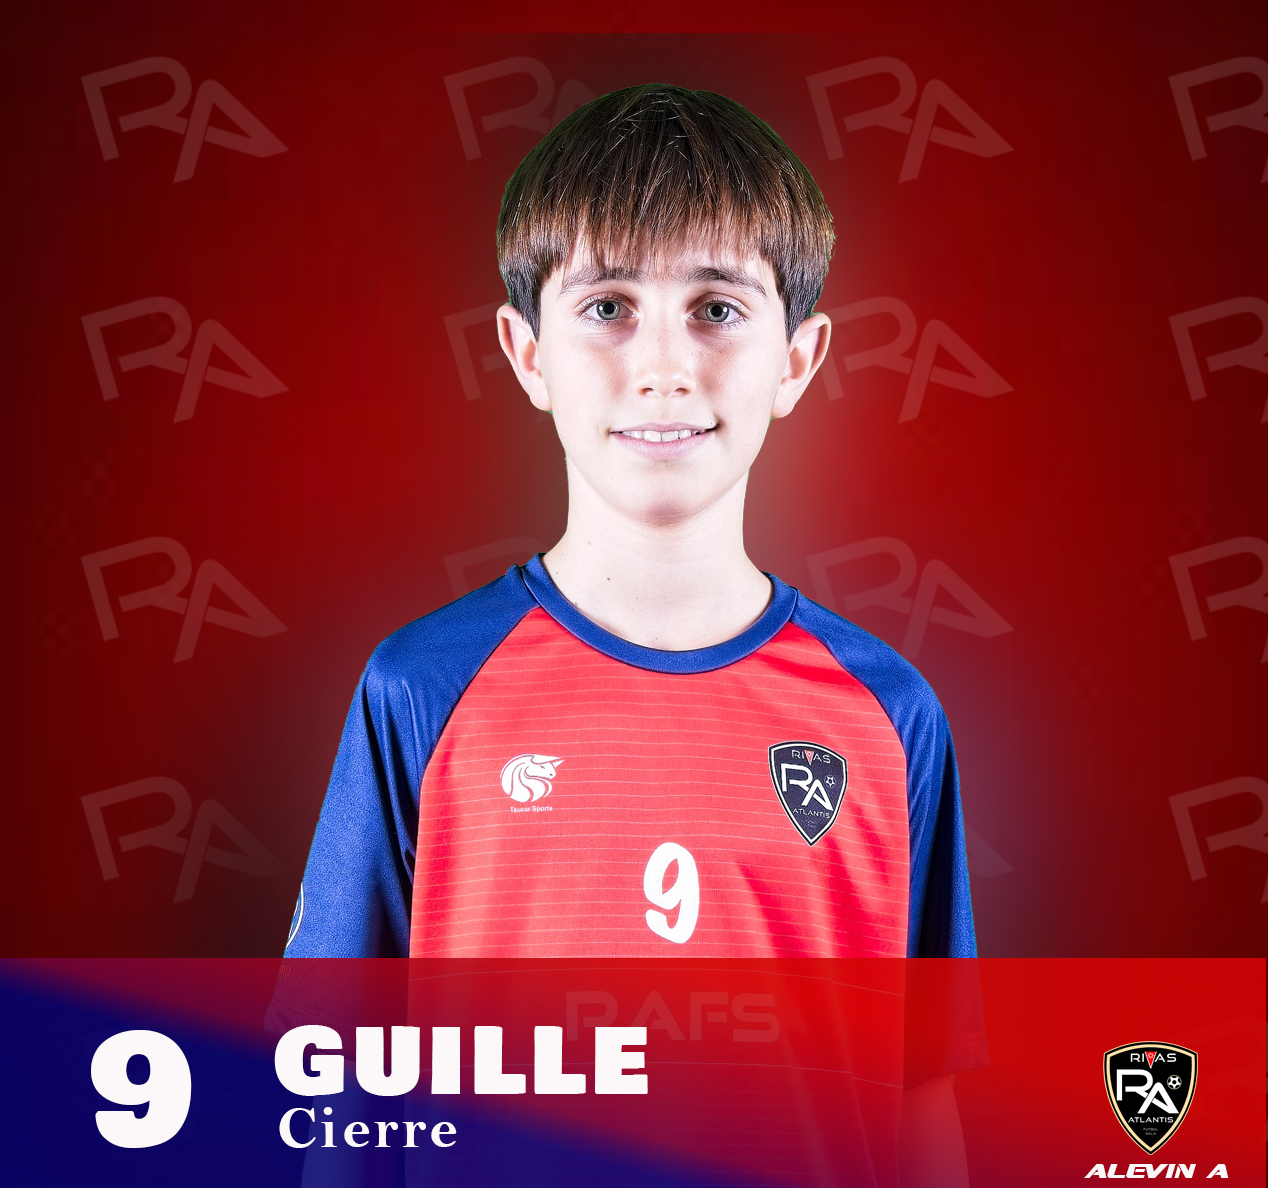 9GUILLE